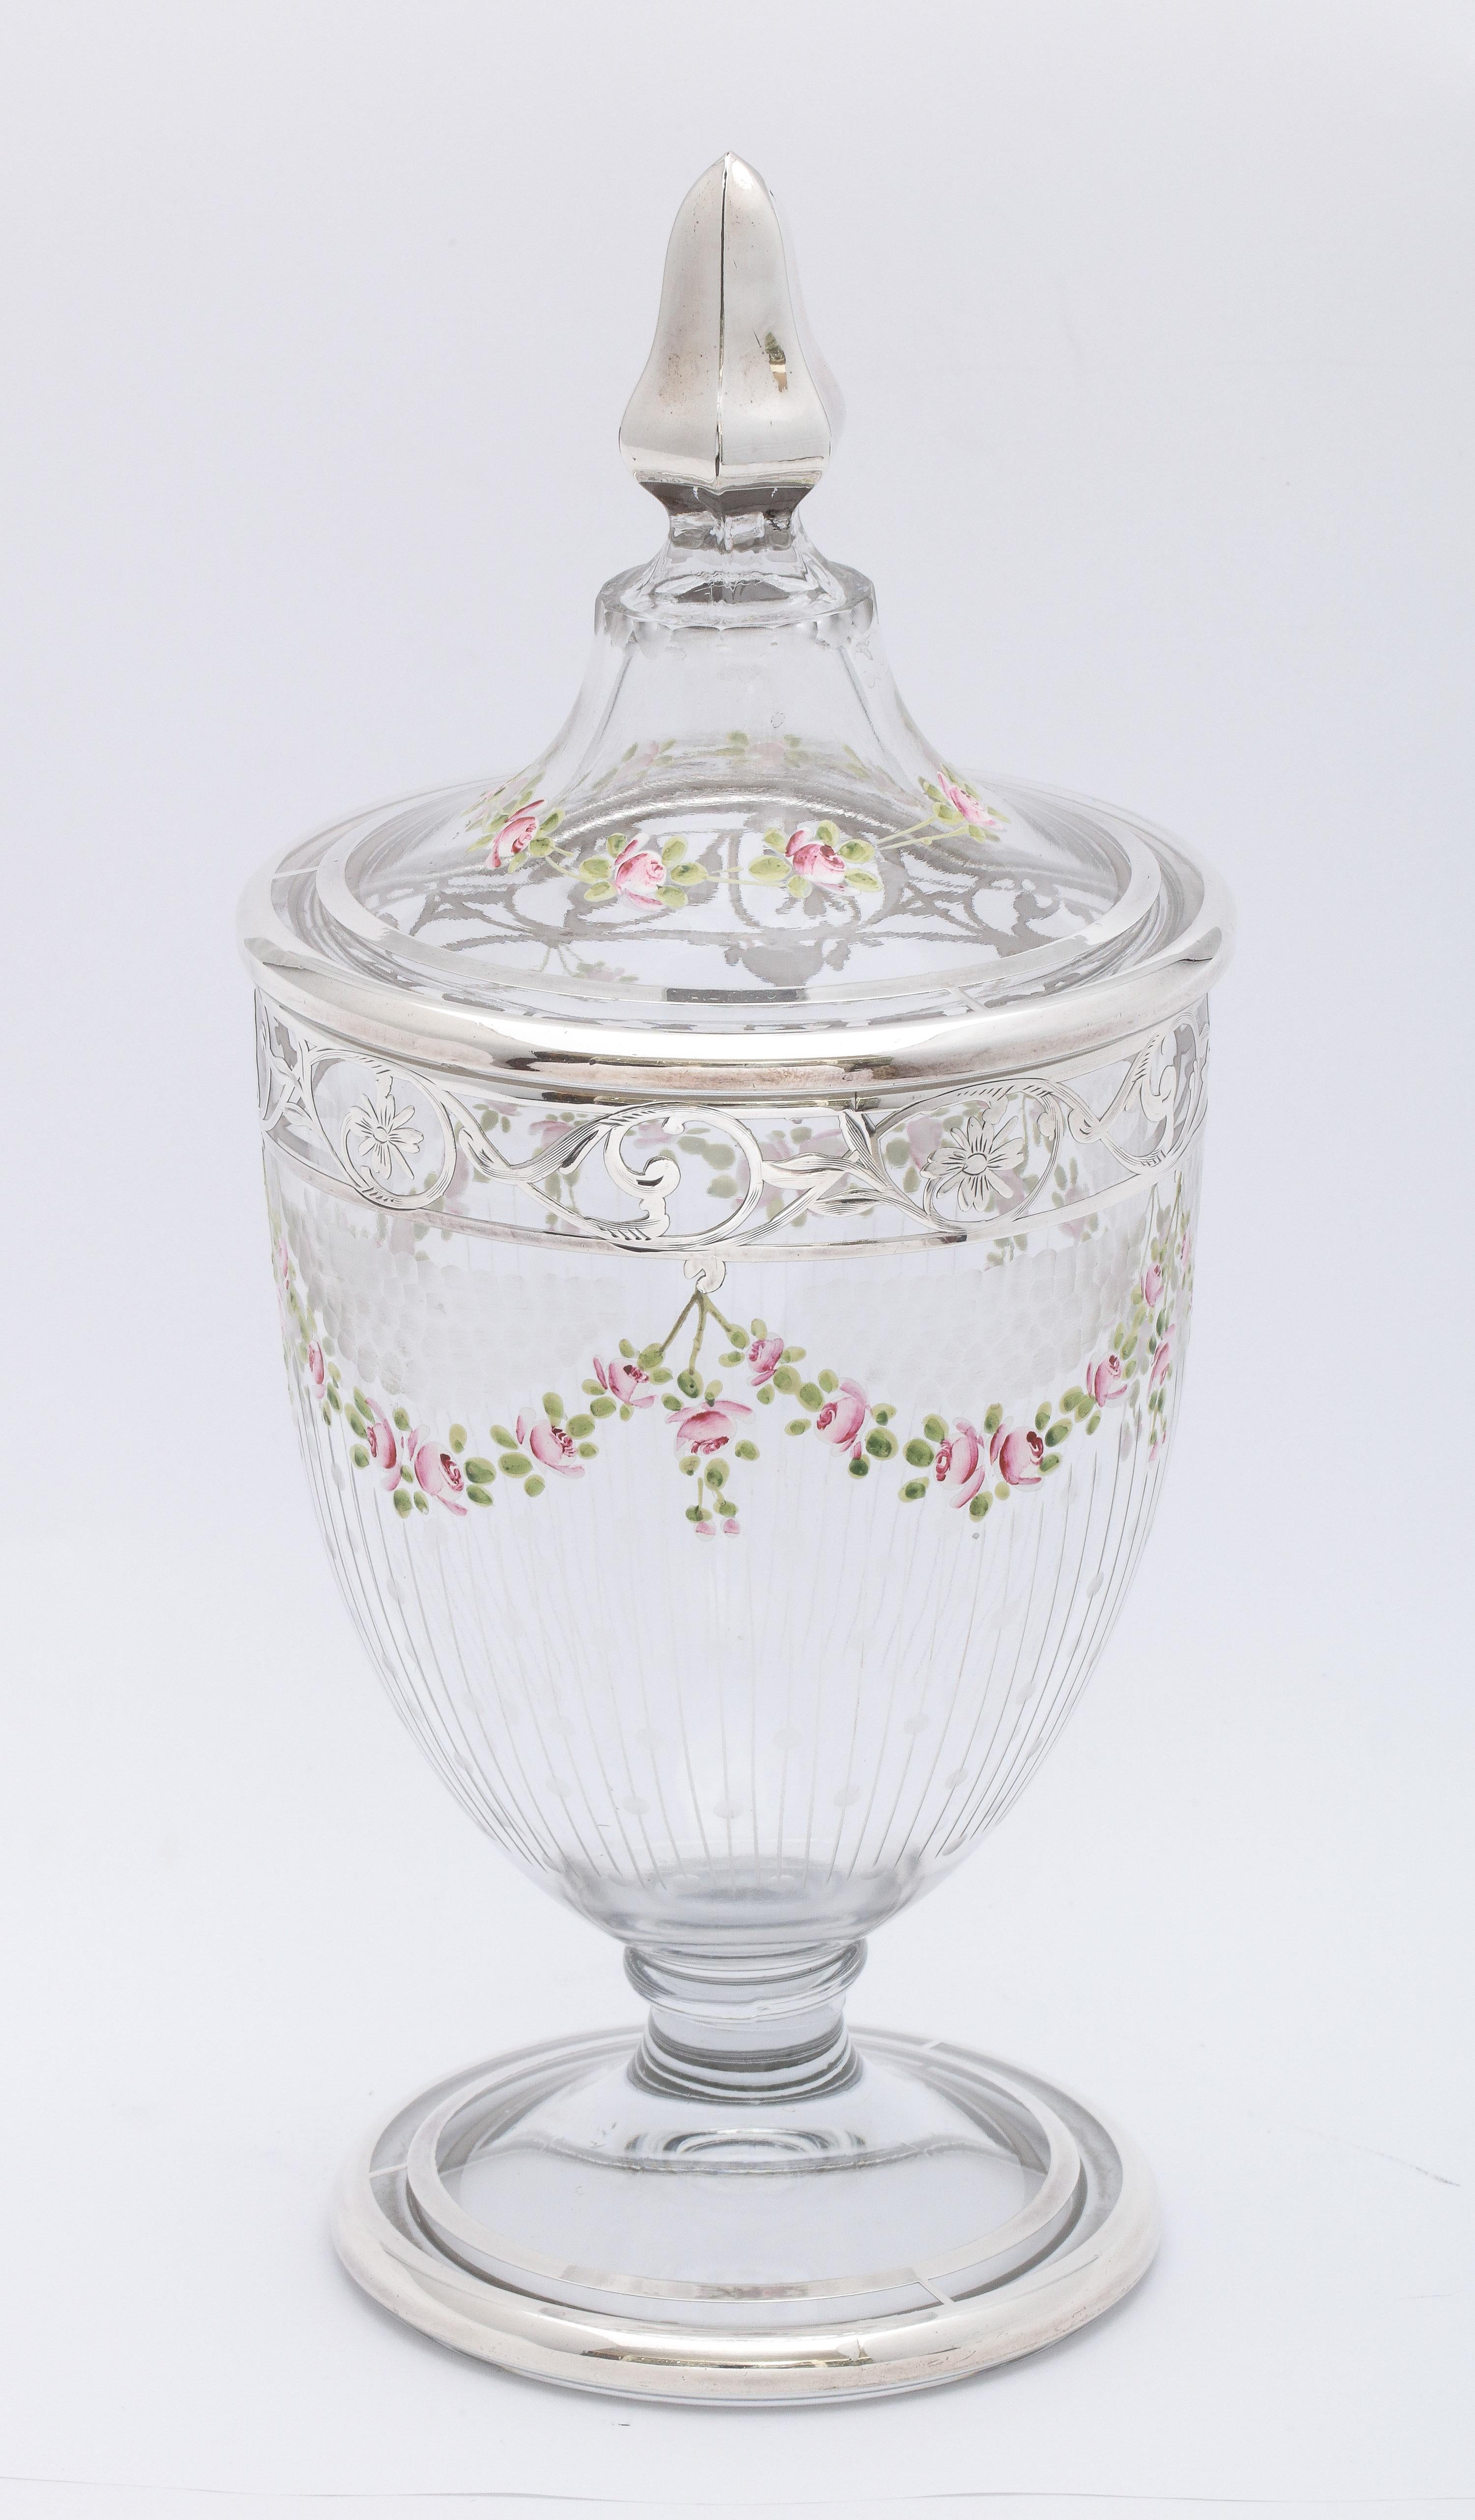 Edwardian Period Sterling Silver-Overlay and Enamel Sweetmeats Jar For Sale 3